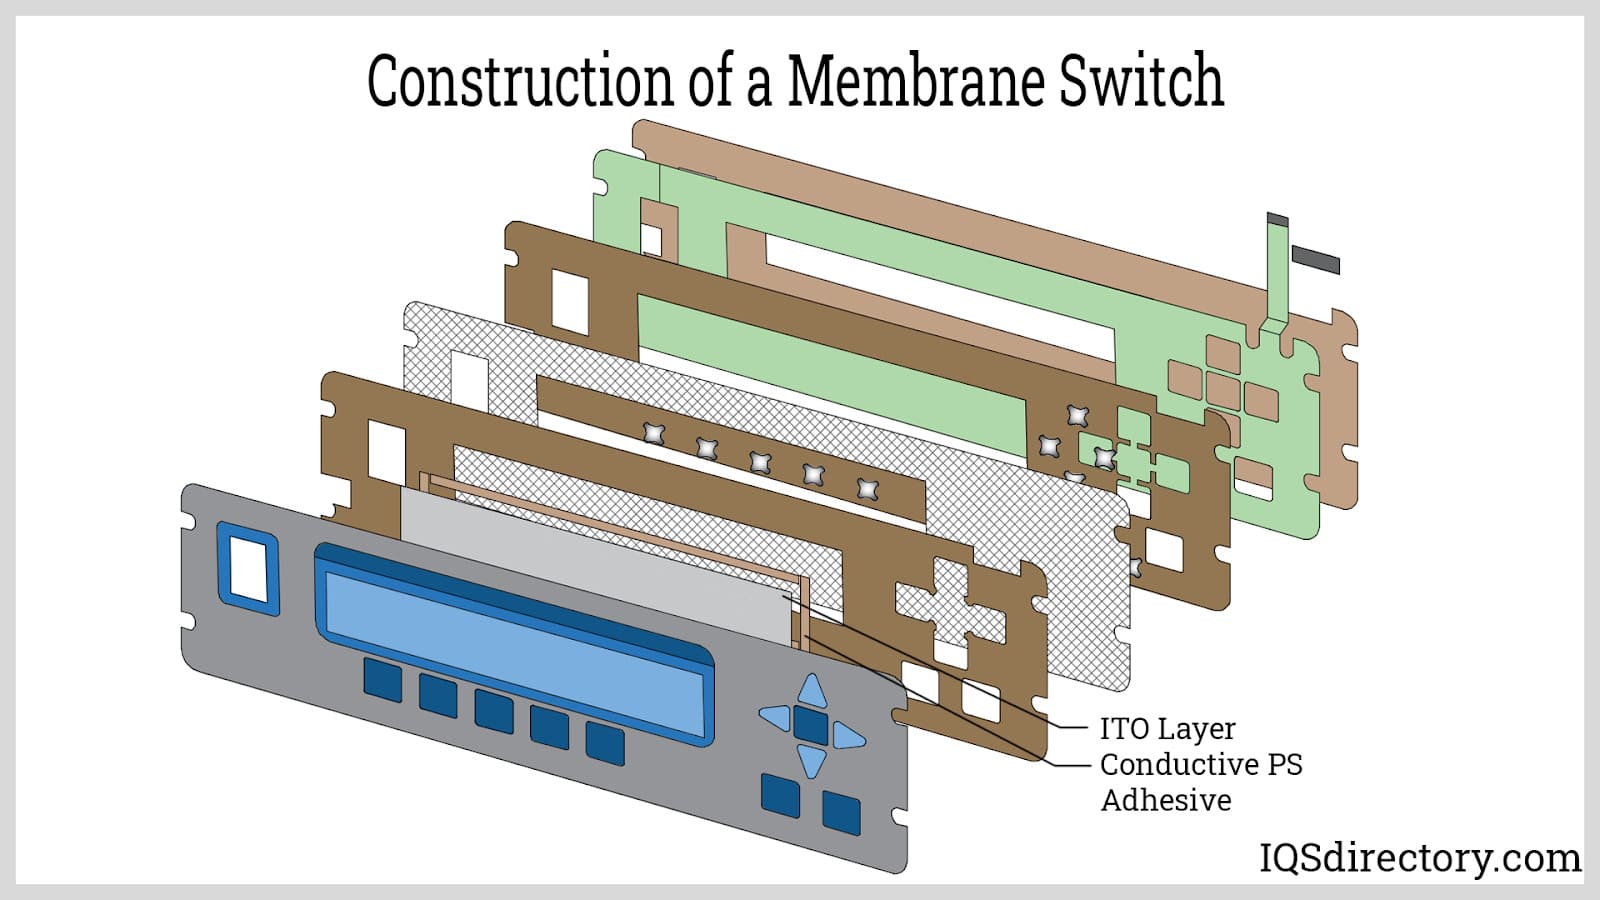 Construction of a Membrane Switch